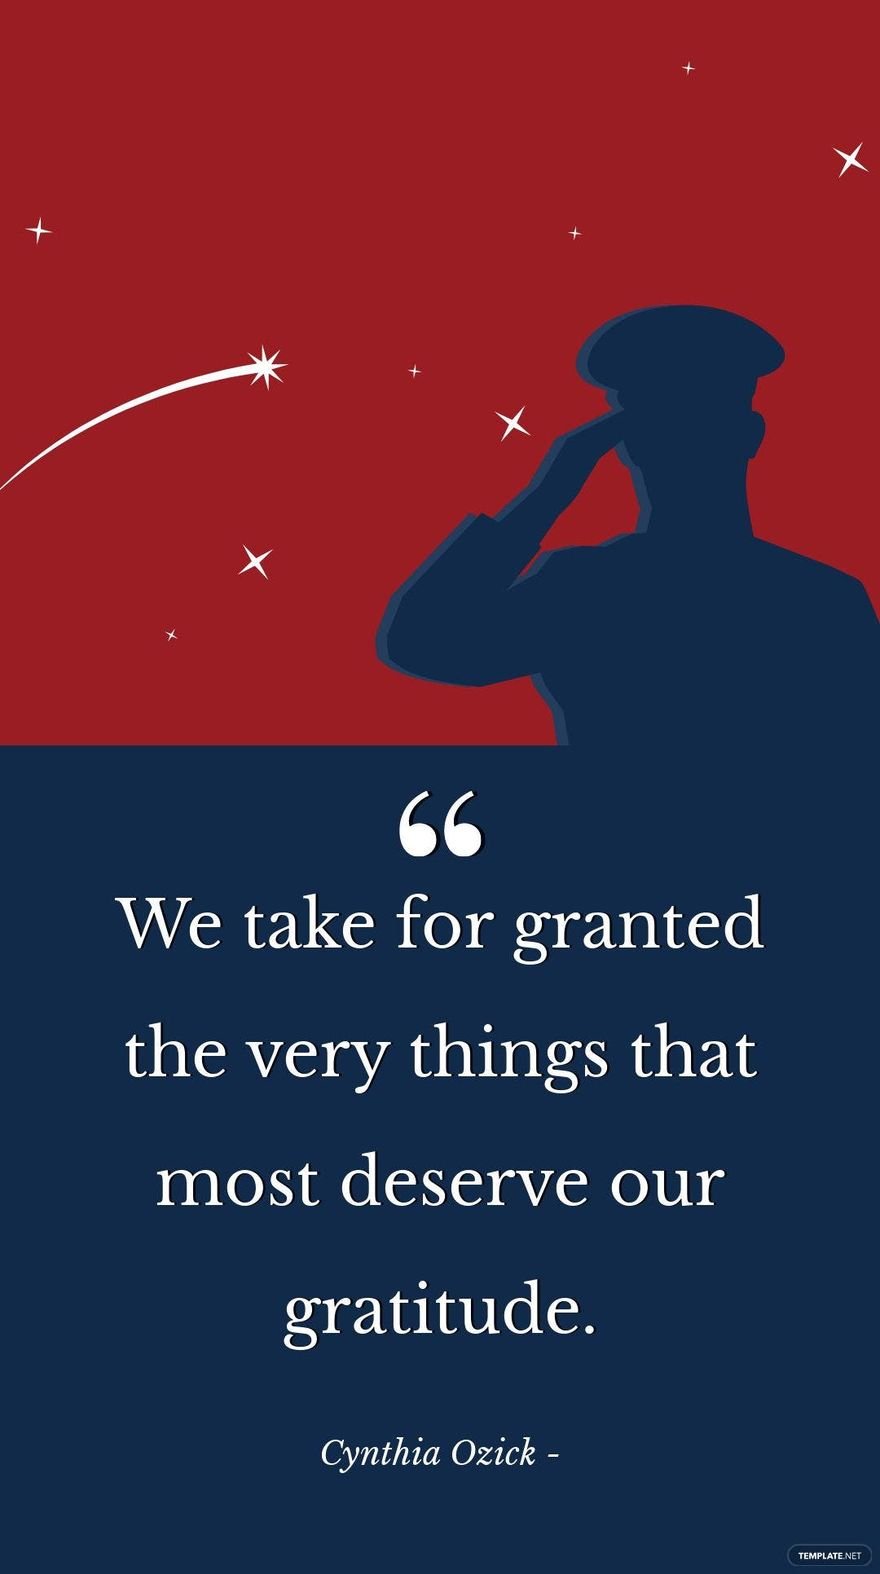 Cynthia Ozick - We take for granted the very things that most deserve our gratitude.